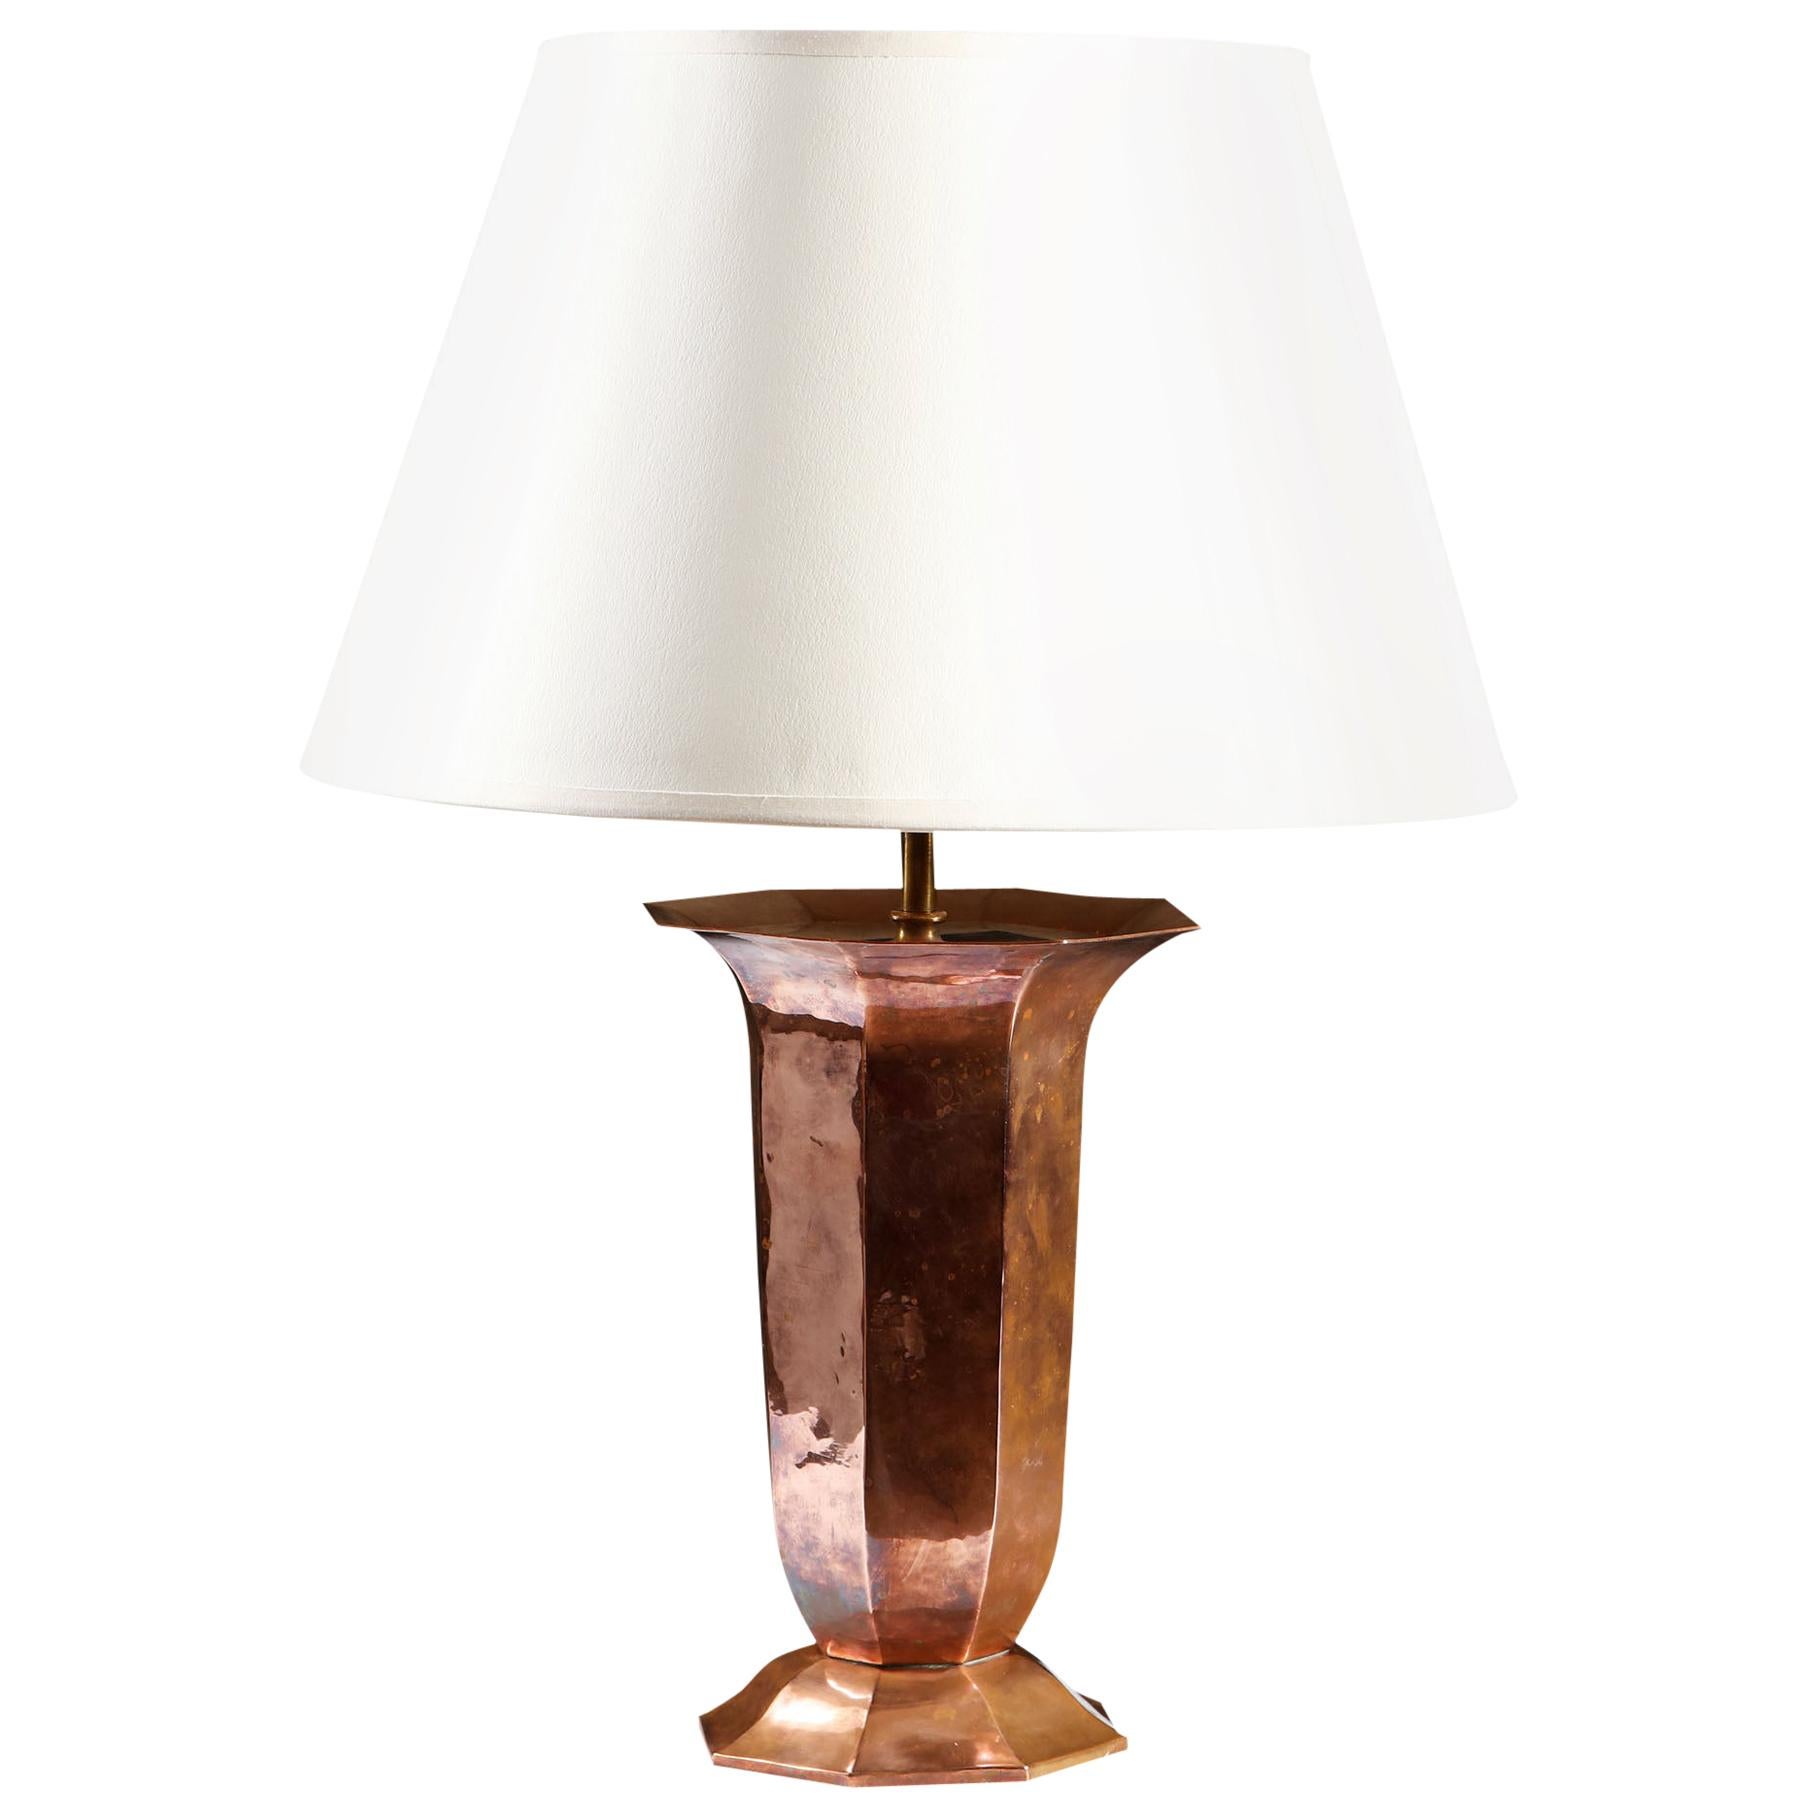 Early 20th Century French Octagonal Copper Vase as a Table Lamp